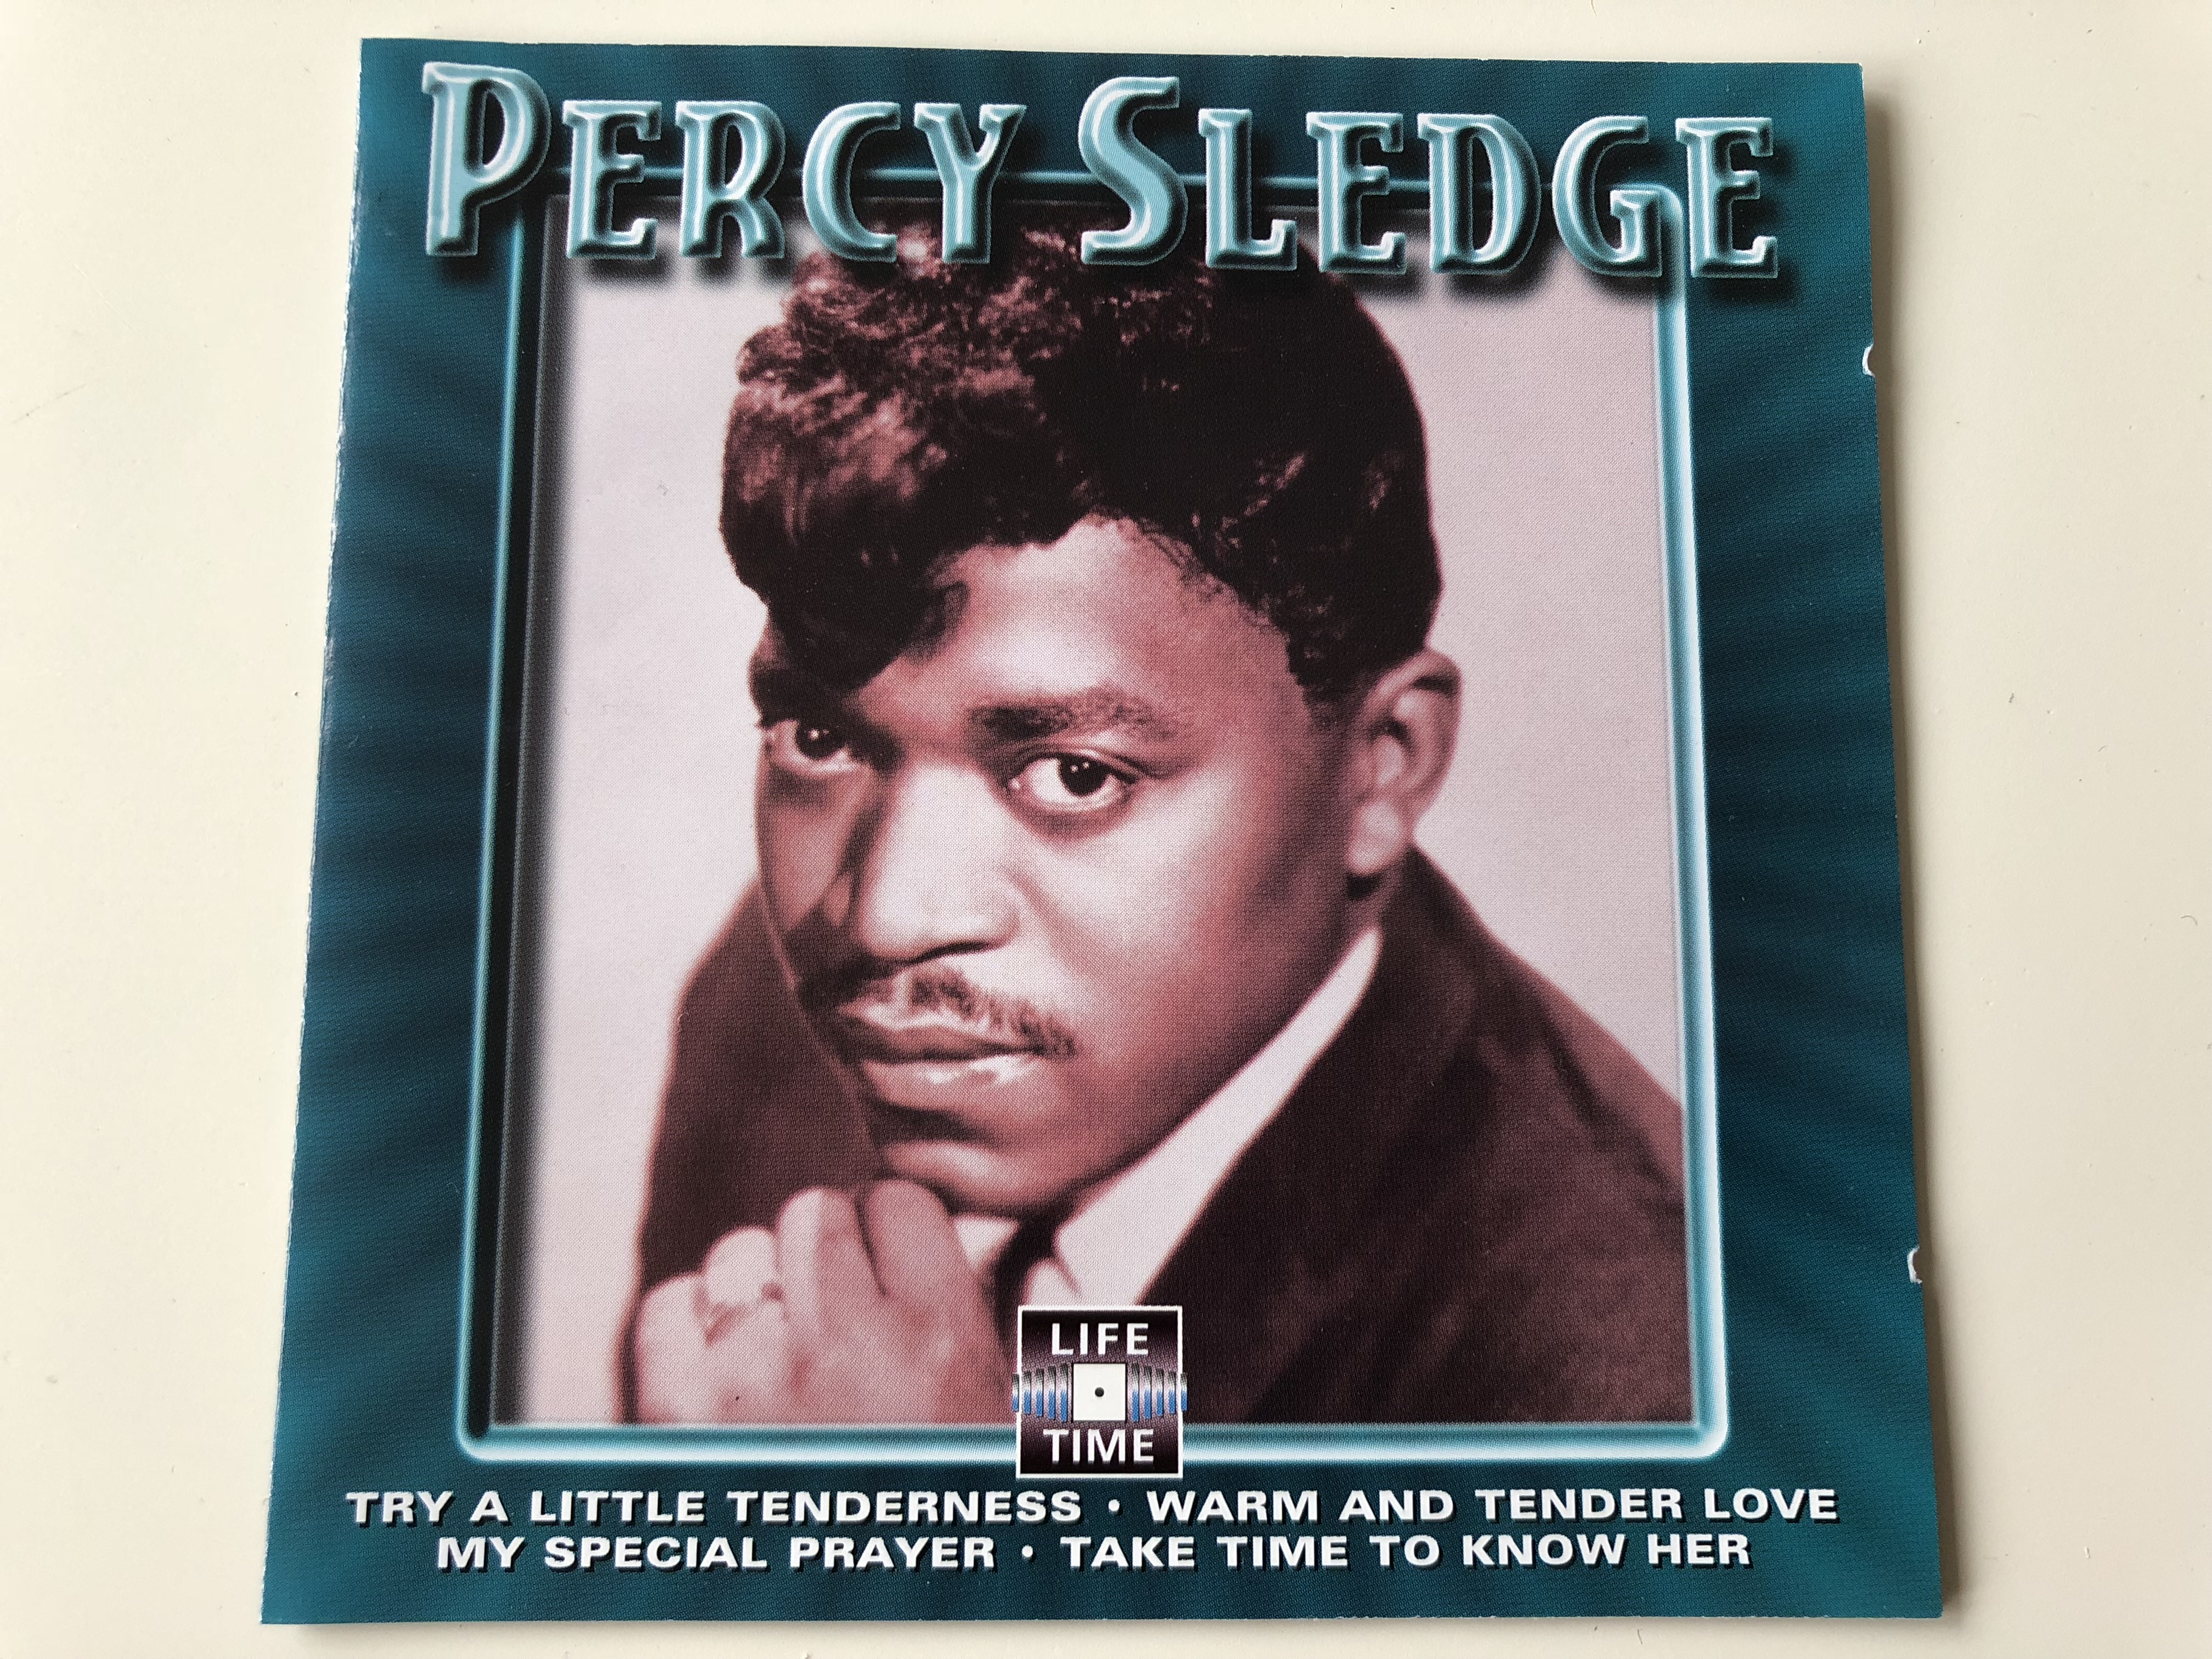 percy-sledge-try-a-little-tenderness-warm-and-tender-love-my-special-prayer-take-time-to-know-her-audio-cd-lt-5048-1-.jpg